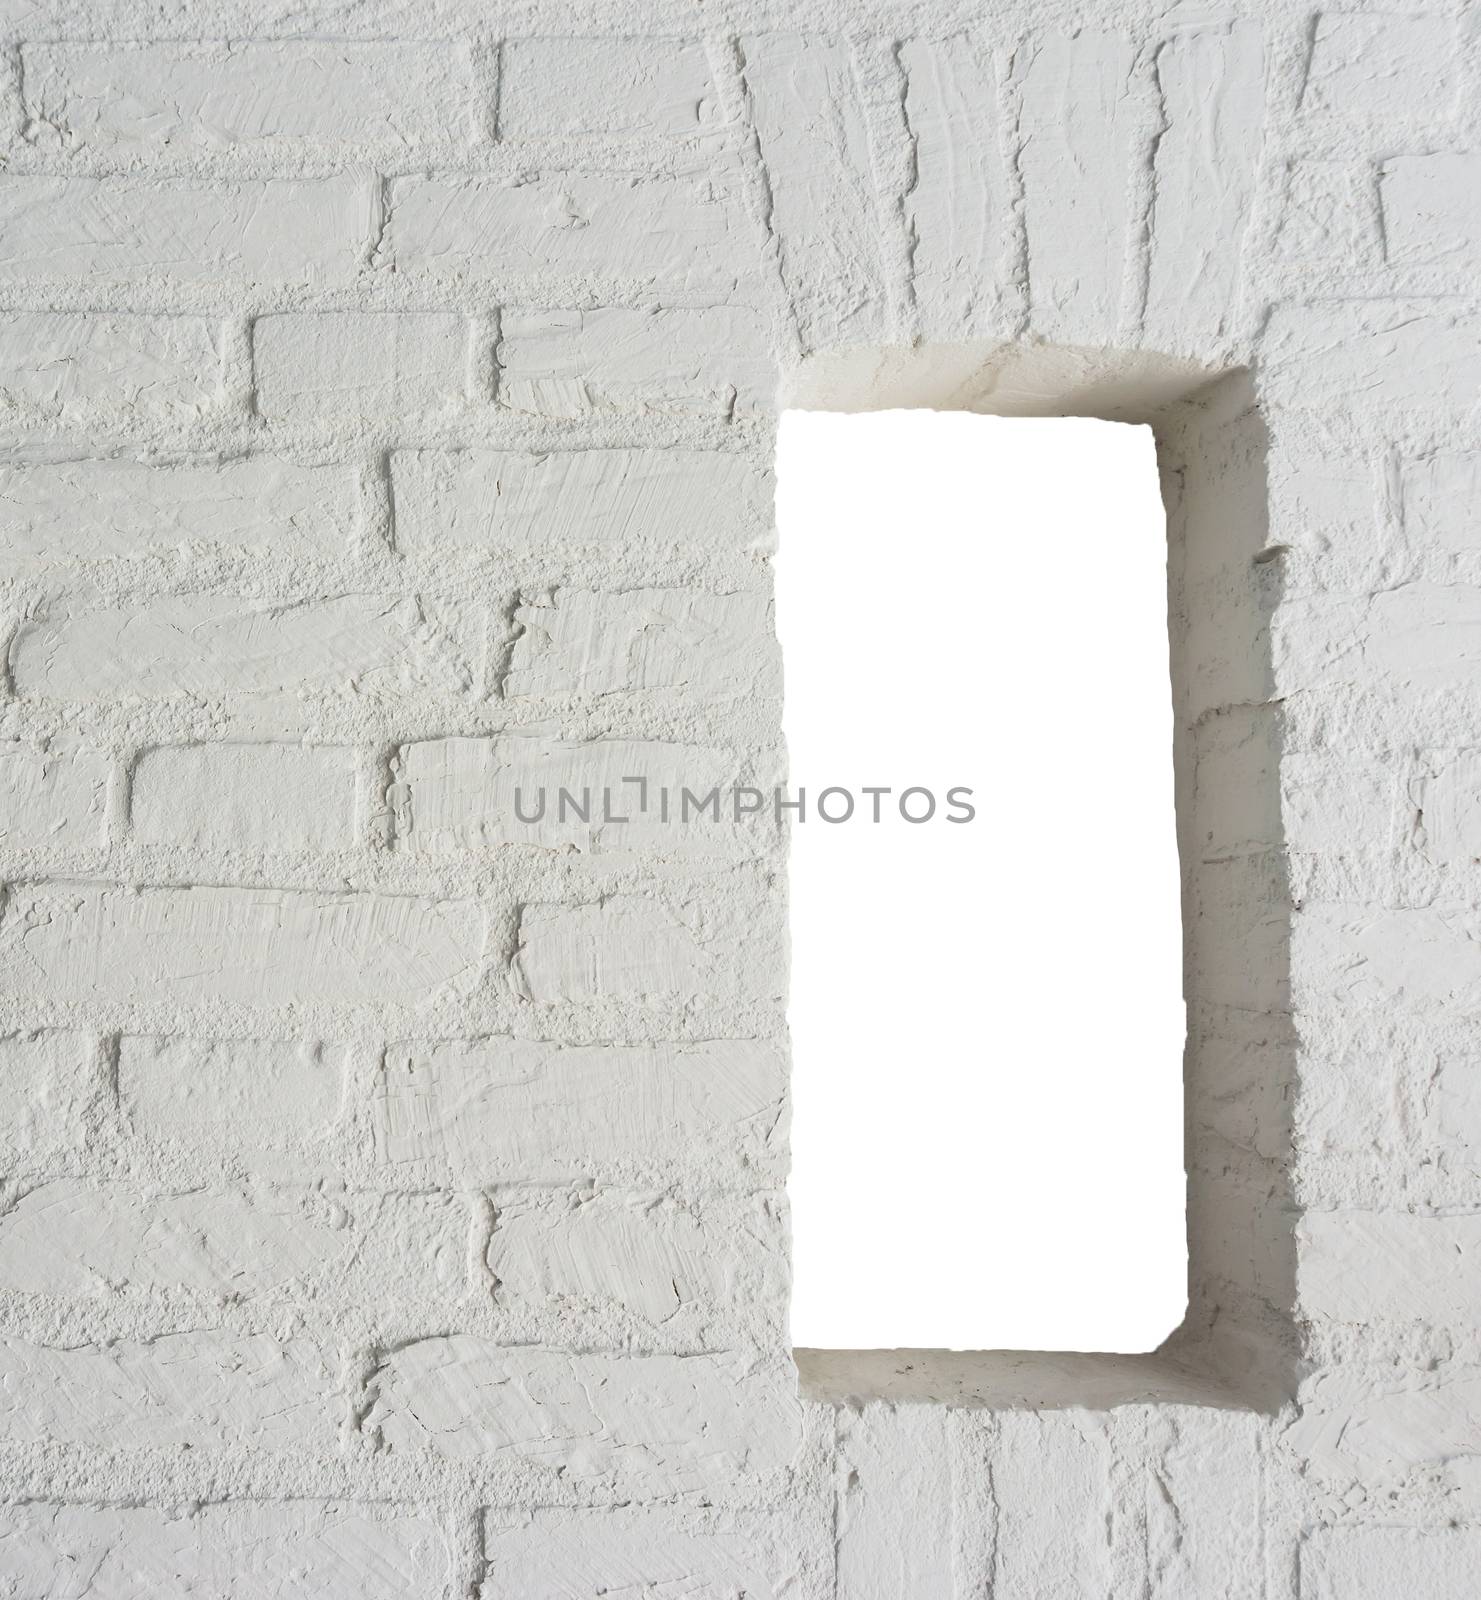 Modern white painted brick wall with open frame work background texture